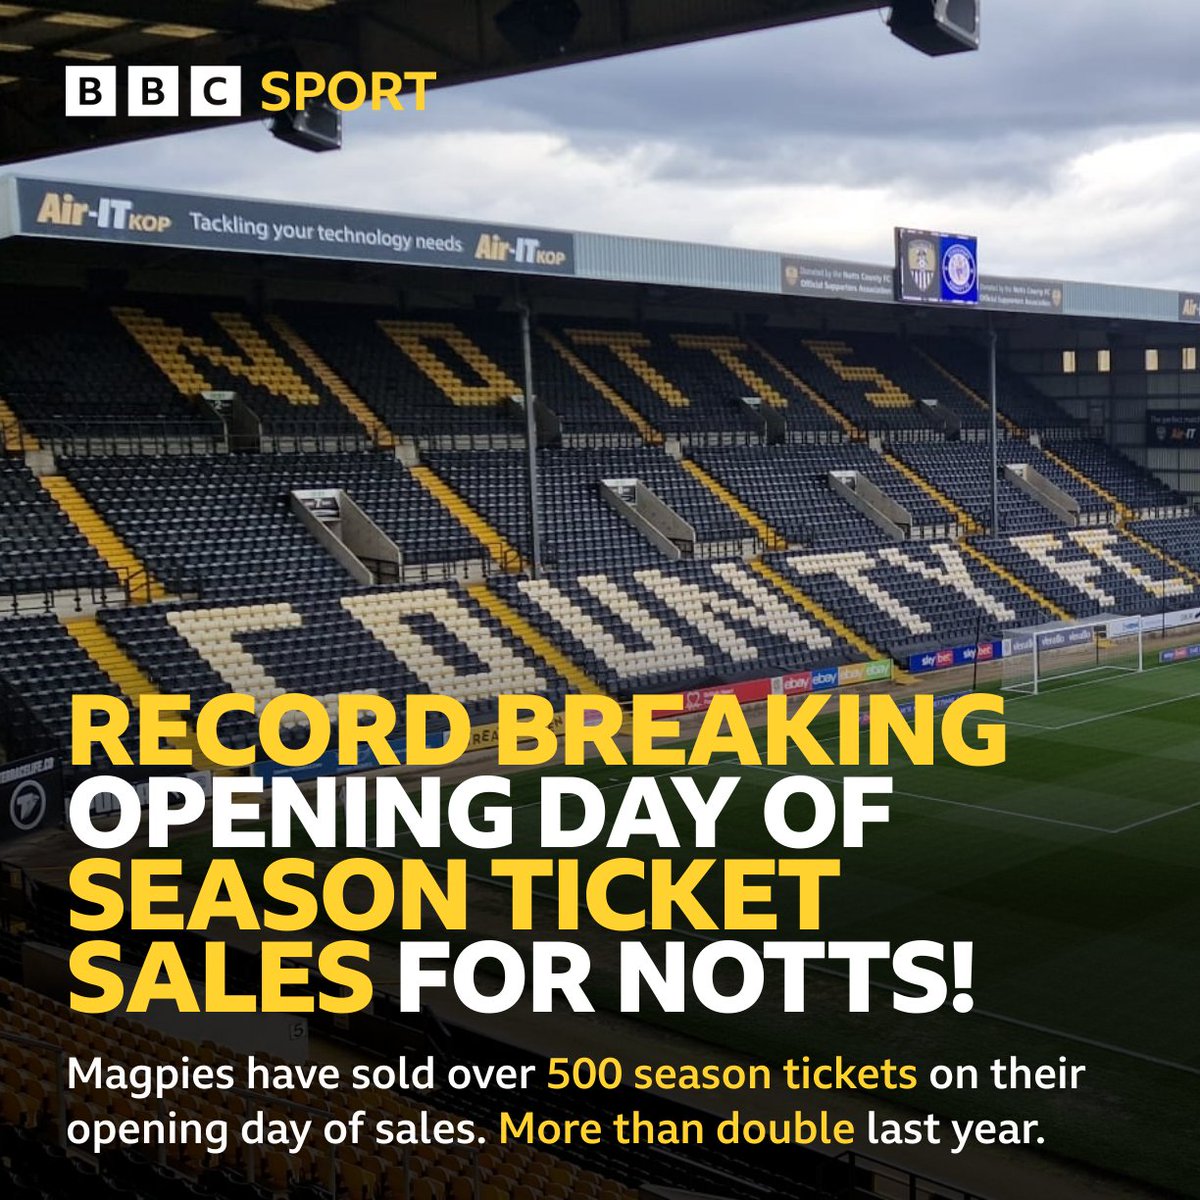 Plenty of optimism going into next season already for Notts County. Fans have snapped up over 500 season tickets on day one of them going on sale. More than double the amount sold on day one last year following promotion back to the EFL. #Notts